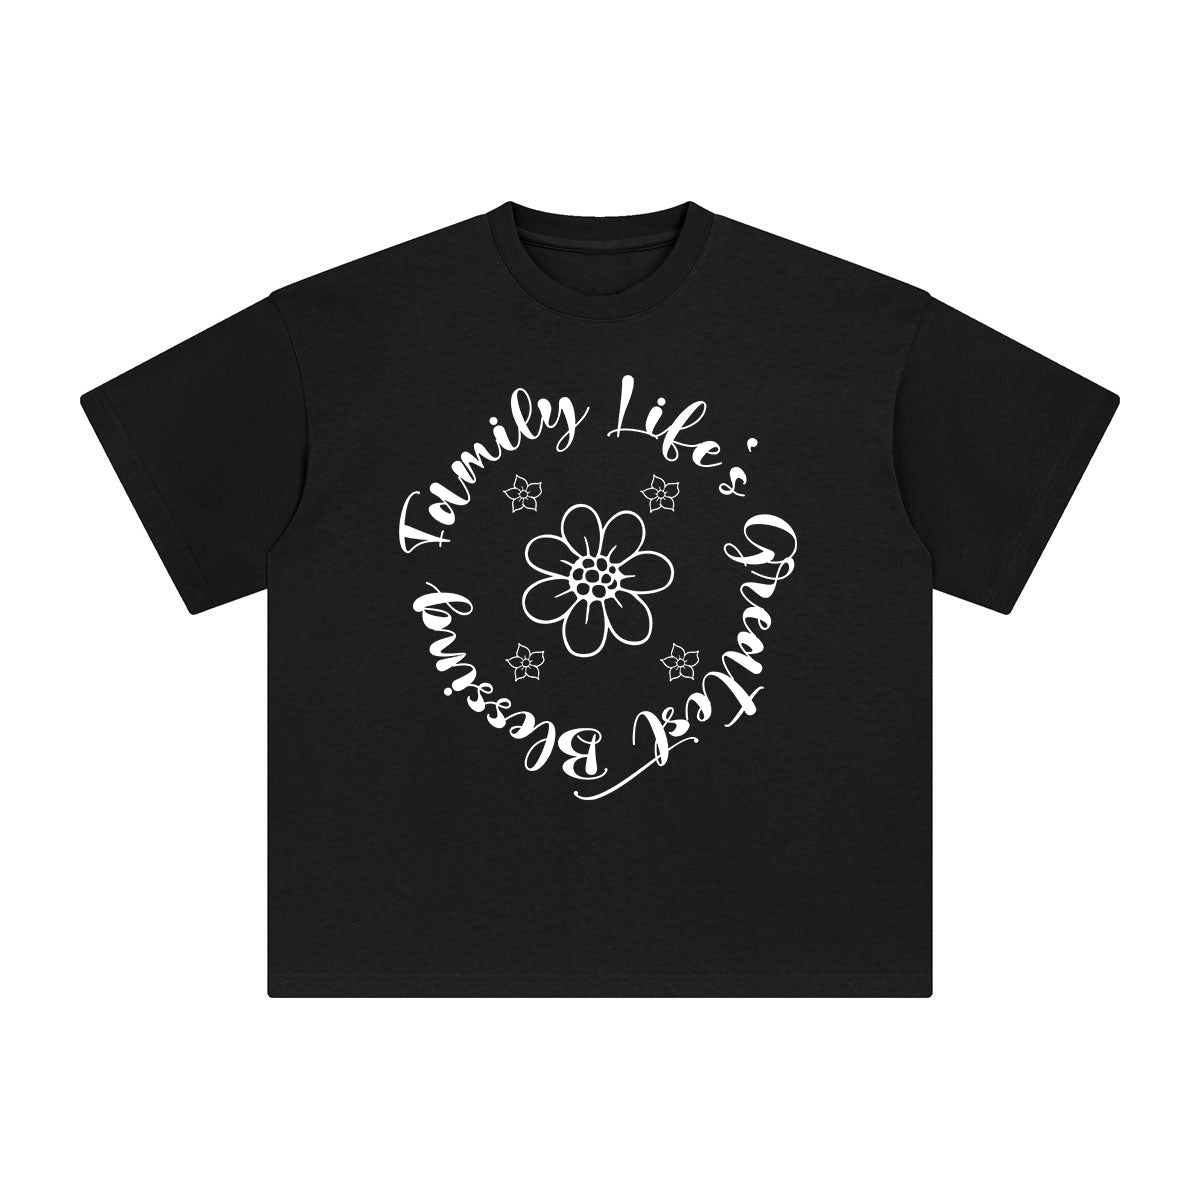 Family Life's Greatest Blessing Graphic Tee